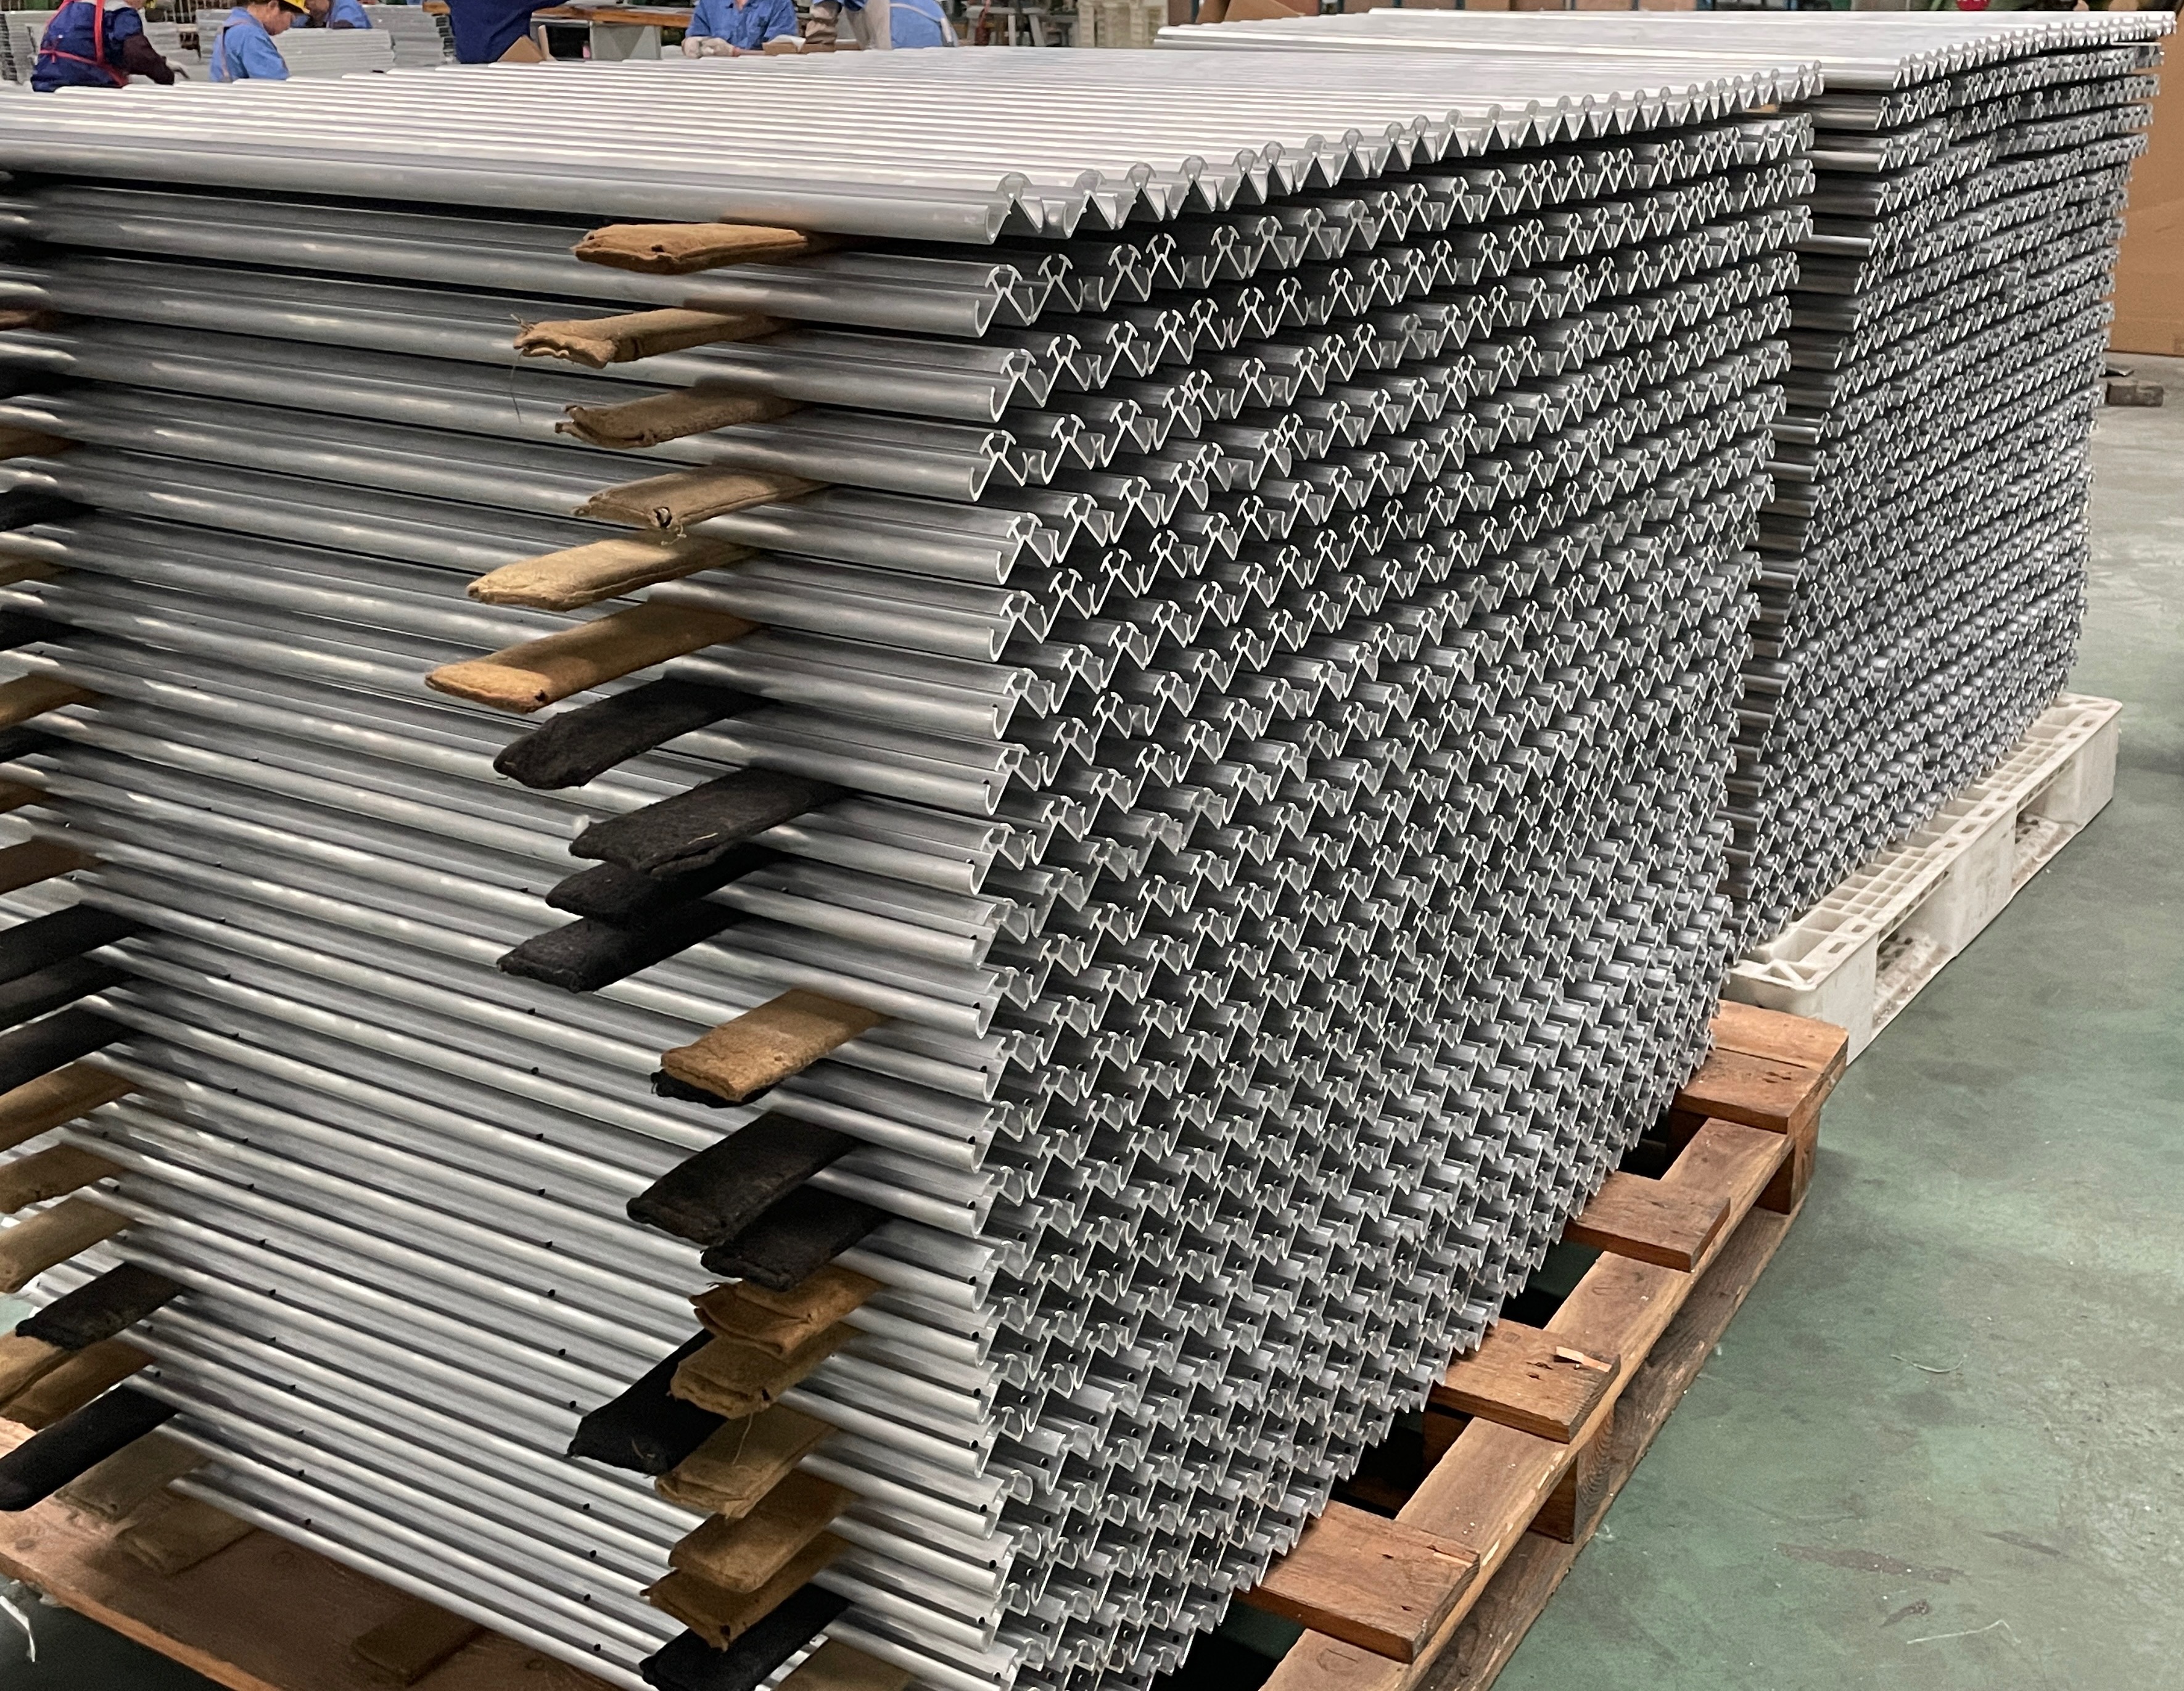 Inventory continues to de-stocking, aluminum prices run strong